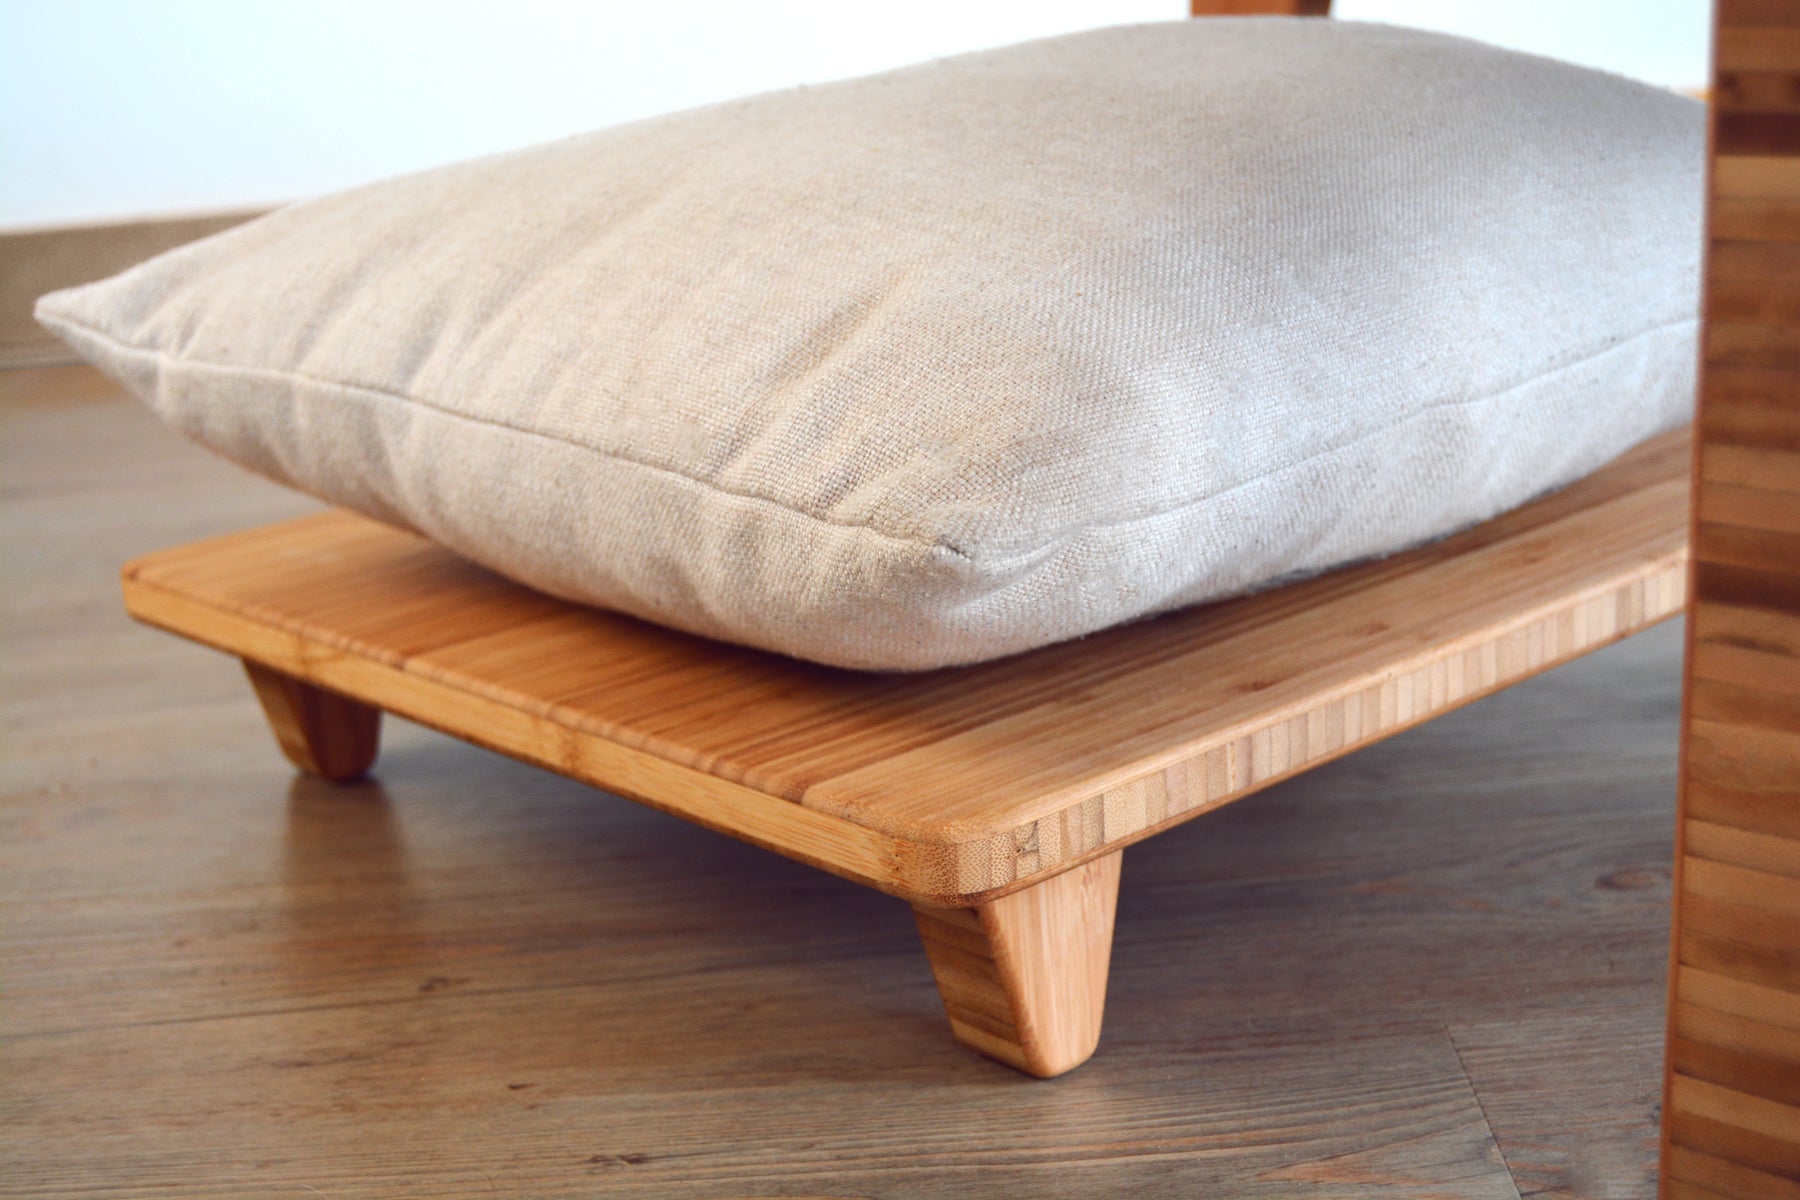 Natural bamboo pillow lift. Japanese, mid-century, Scandinavian and contemporary inspired. Sustainable wood alternative, made from solid grass.